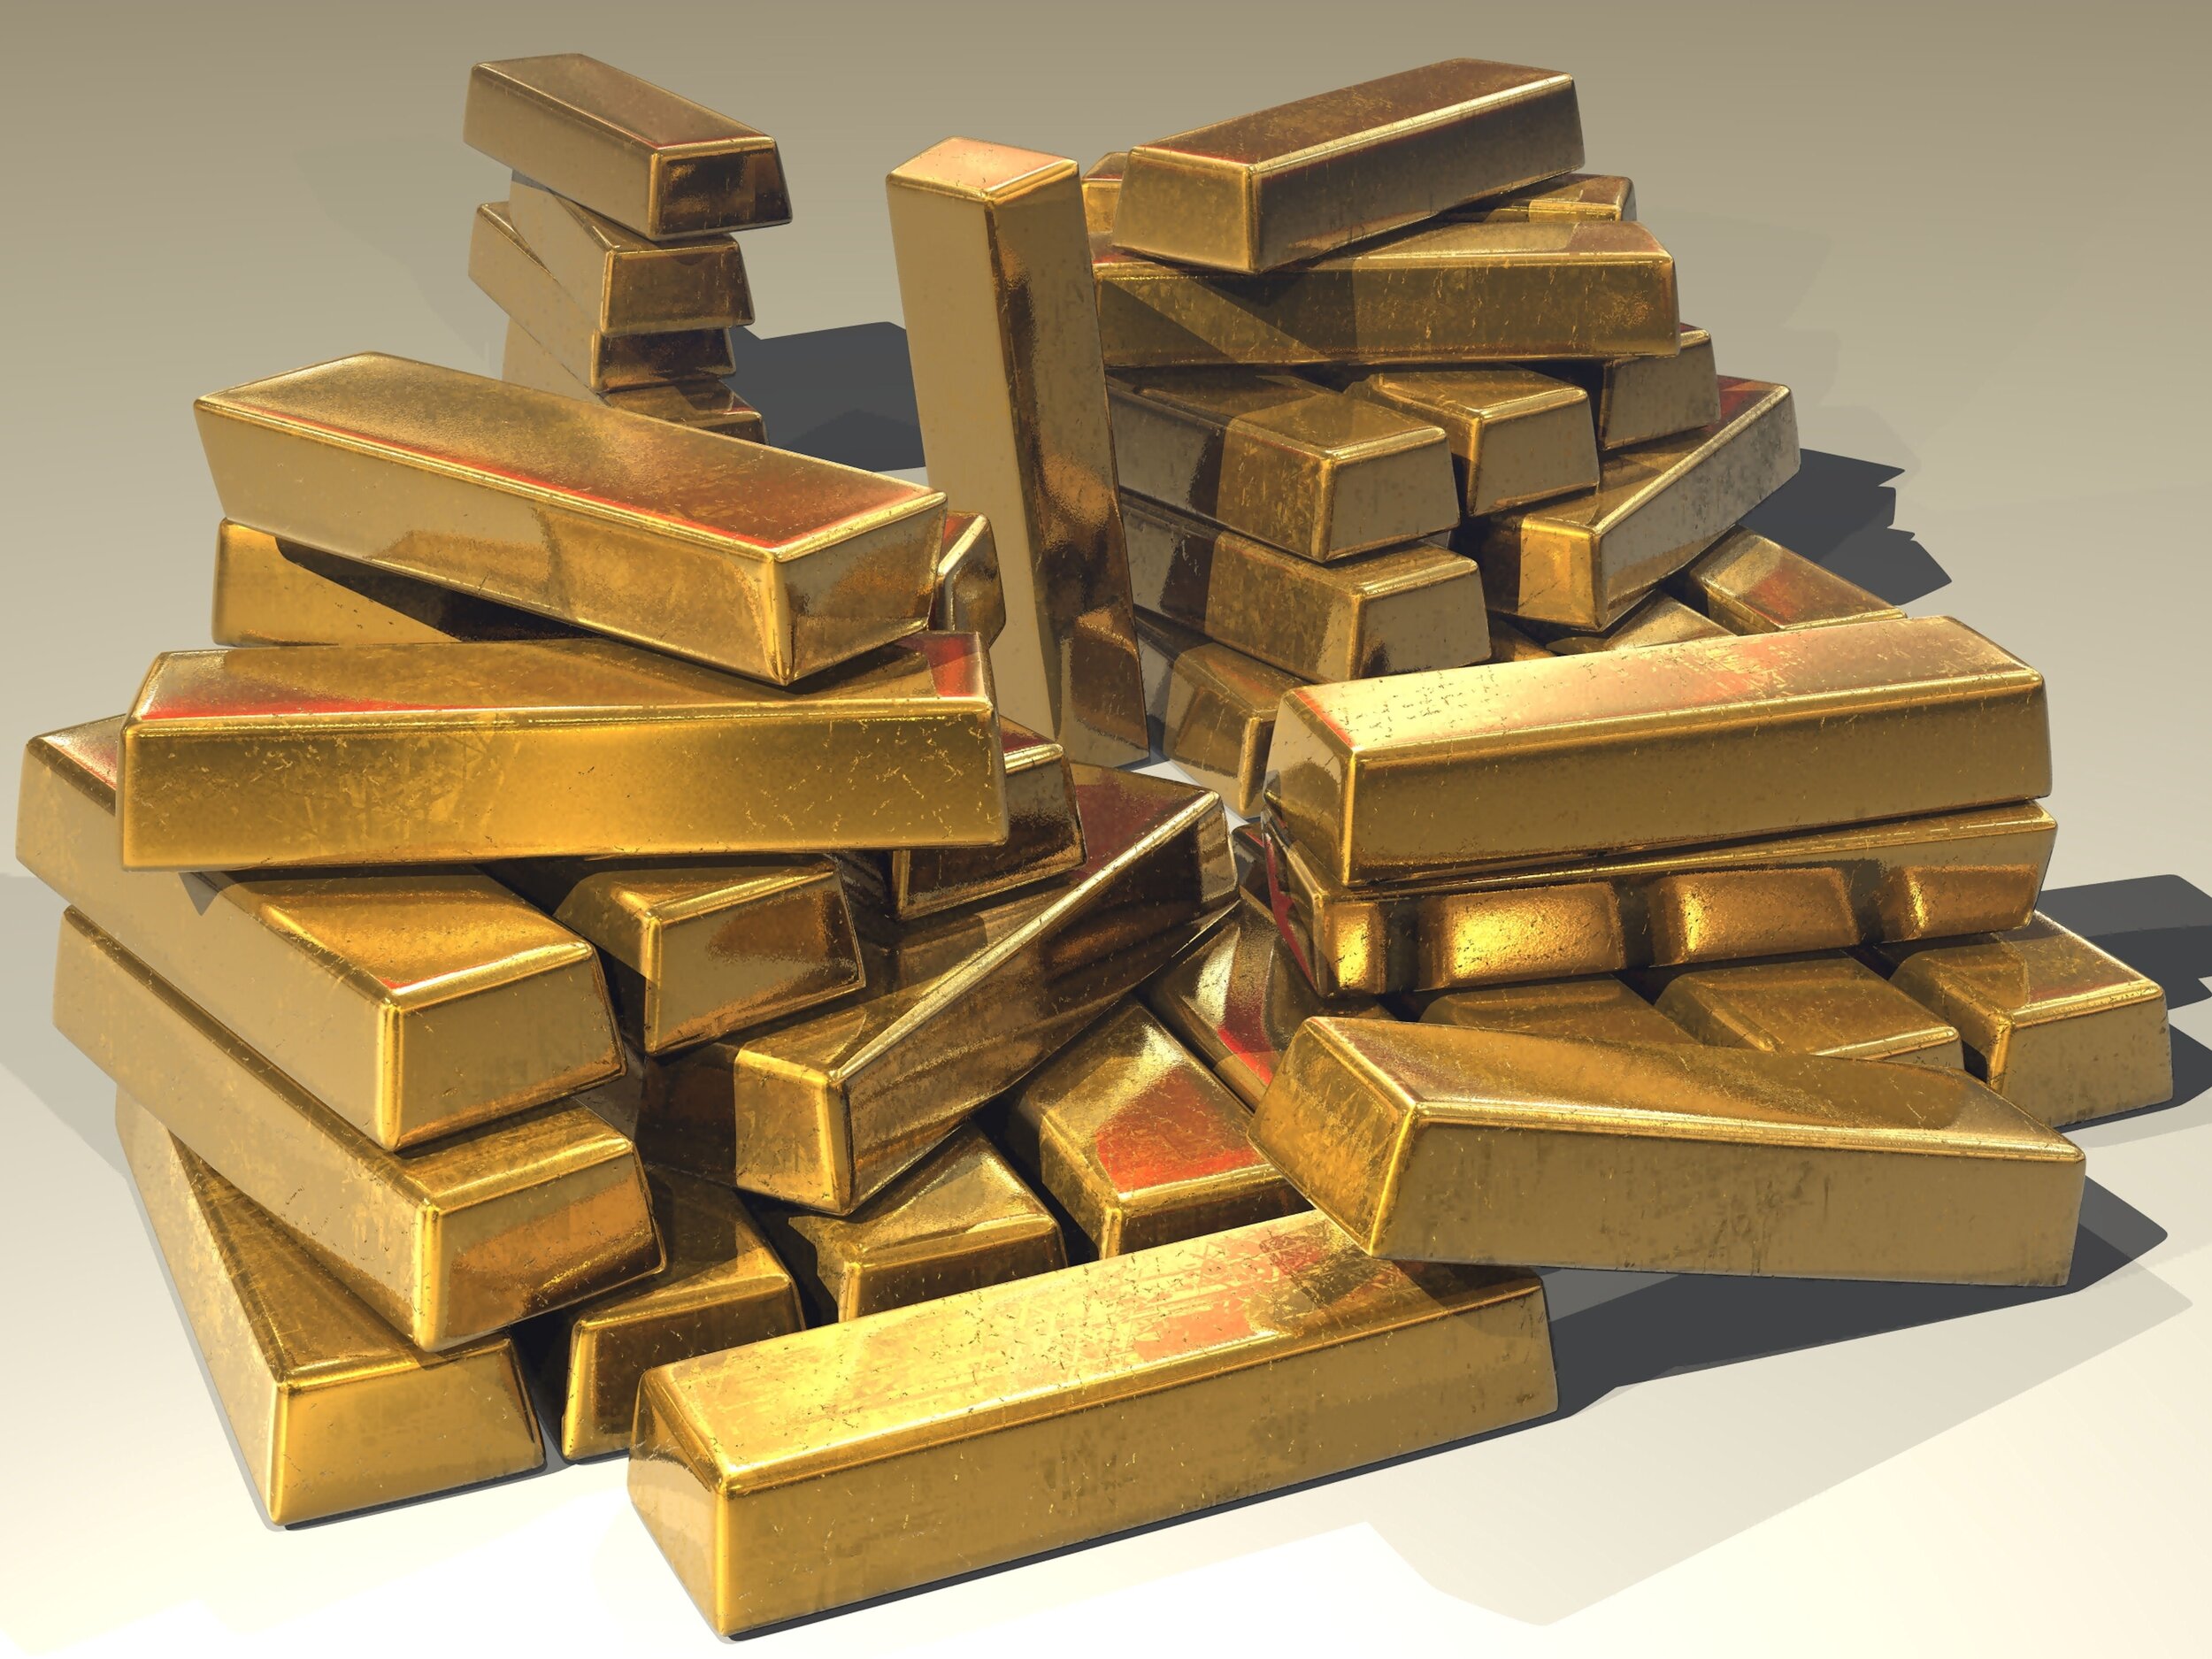 Gold Bullion, Coins and other Precious Metals — The Right Stone